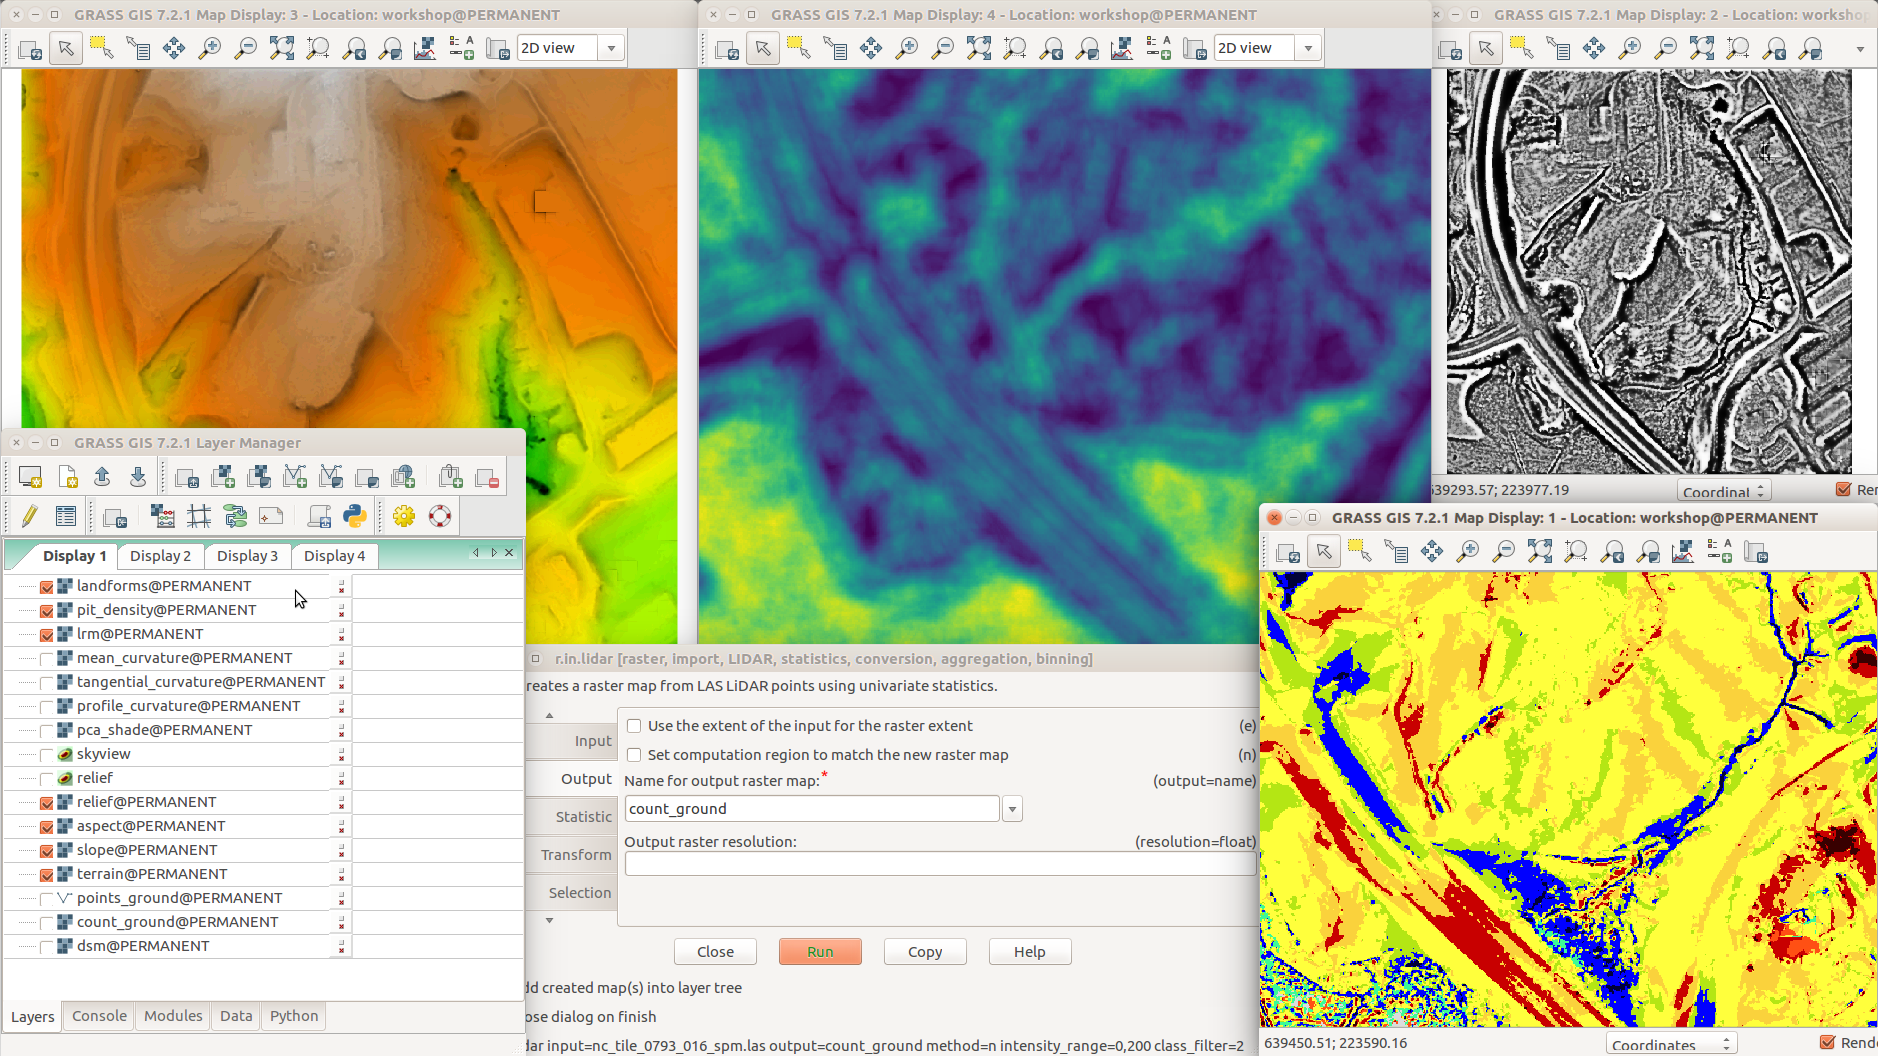 Thumbnail for File:Different terrain analyses and visualizations in multiple Map Displays.png